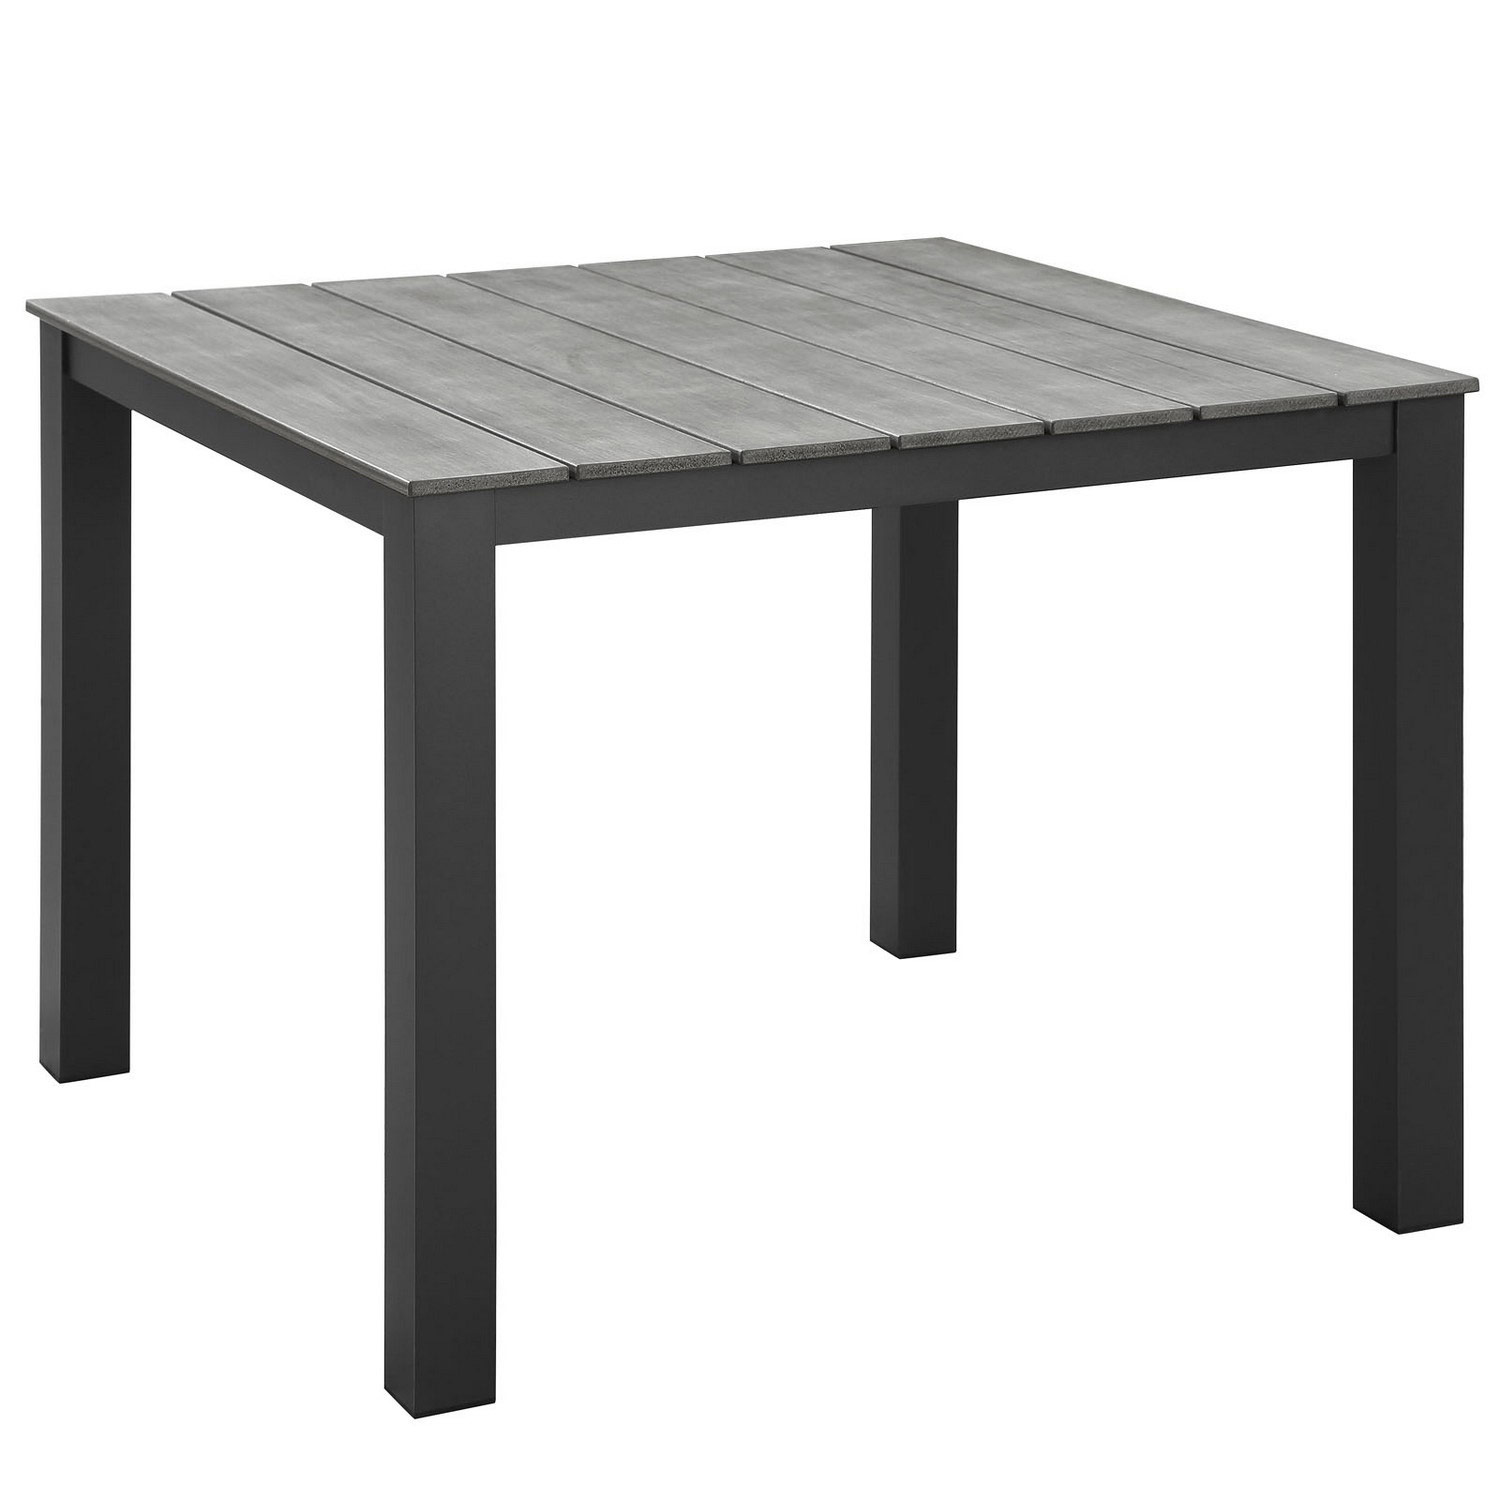 Modway Maine 40 Outdoor Patio Dining Table - Brown/Gray